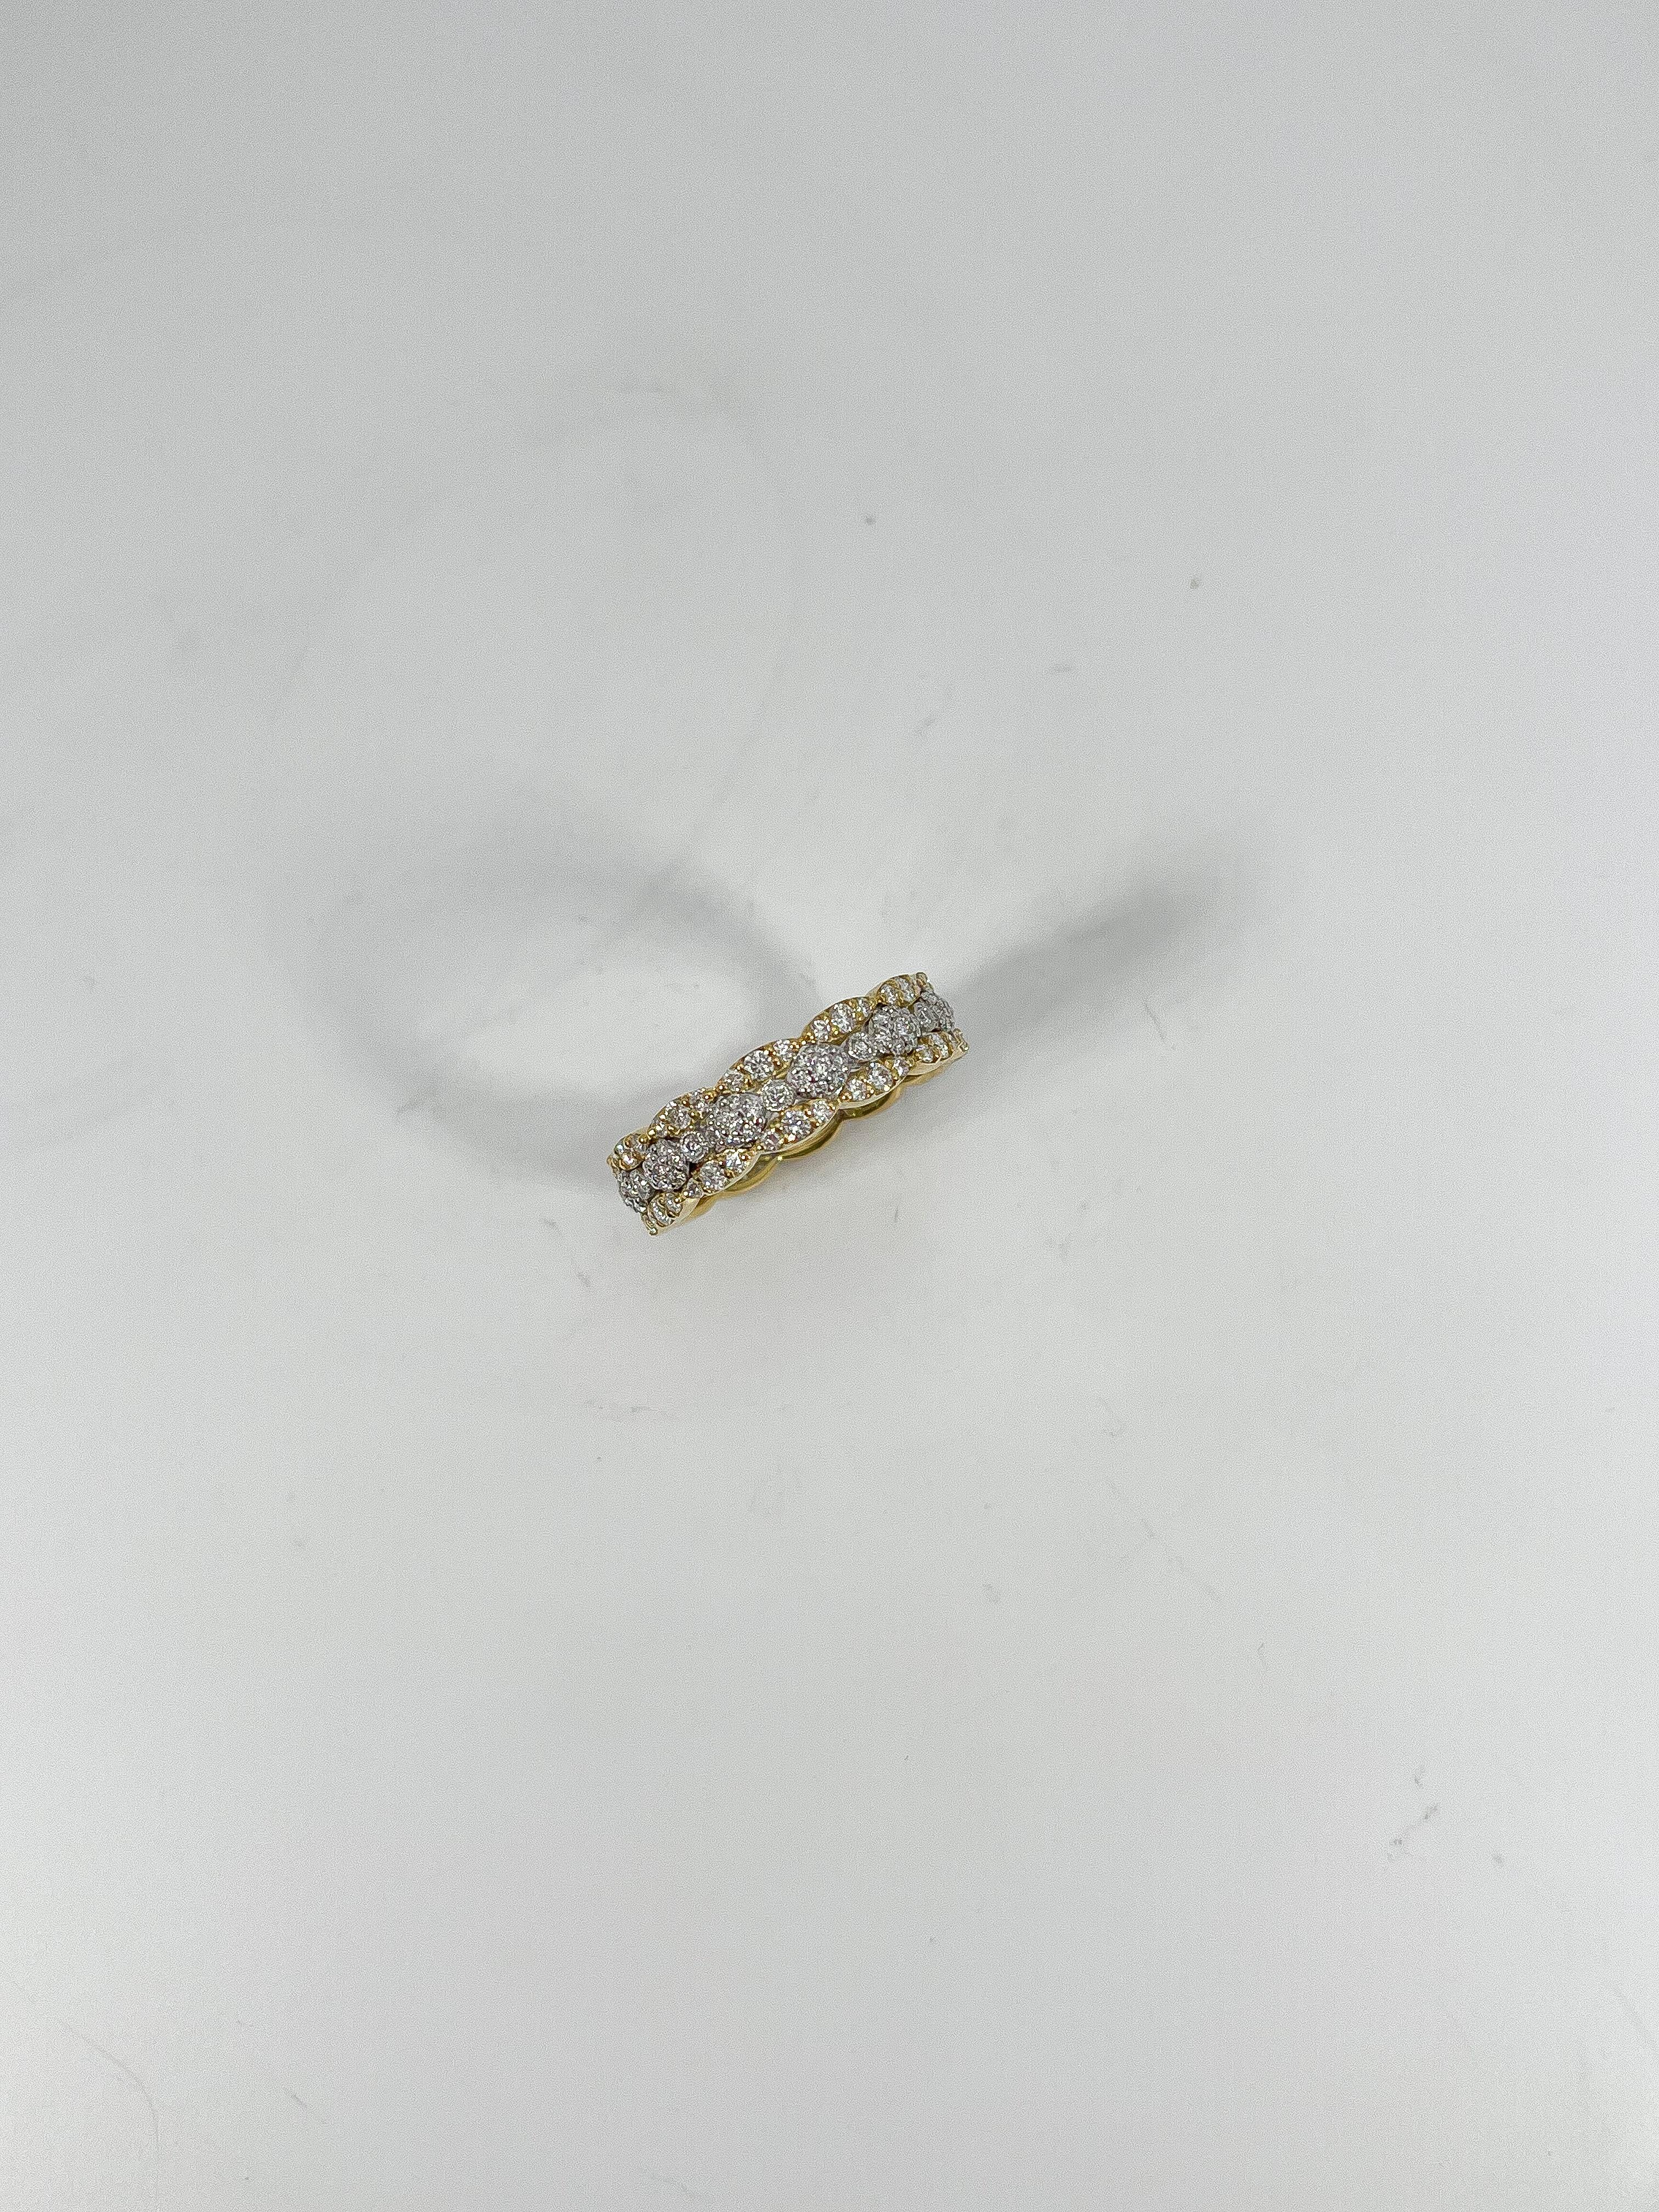 18k two toned .97 CTW diamond fashion band. The diamonds in this ring are all round, the width is 5.3 mm, the size of the ring is a 6 1/2, and it has a total weight of 5.25 grams. 
Part number- LR2387-A